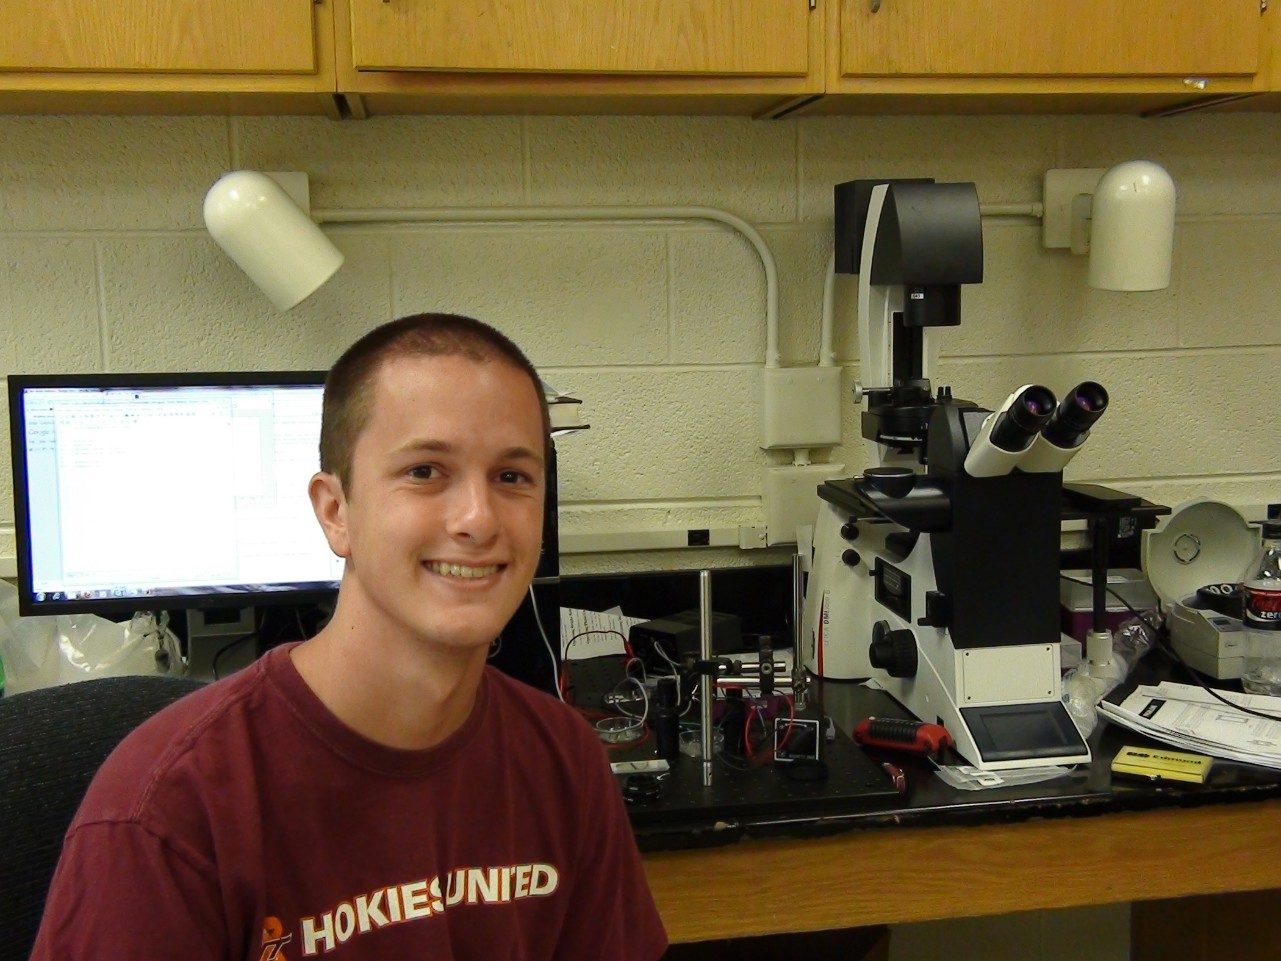 Sean Gart, of Salem, Va., a senior in engineering science and mechanics, co-authored the new paper, “The collective motion of nematodes in a thin liquid layer.”  His adviser is Sunghwan “Sunny” Jung, an assistant professor of engineering science and mechanics at Virginia Tech.